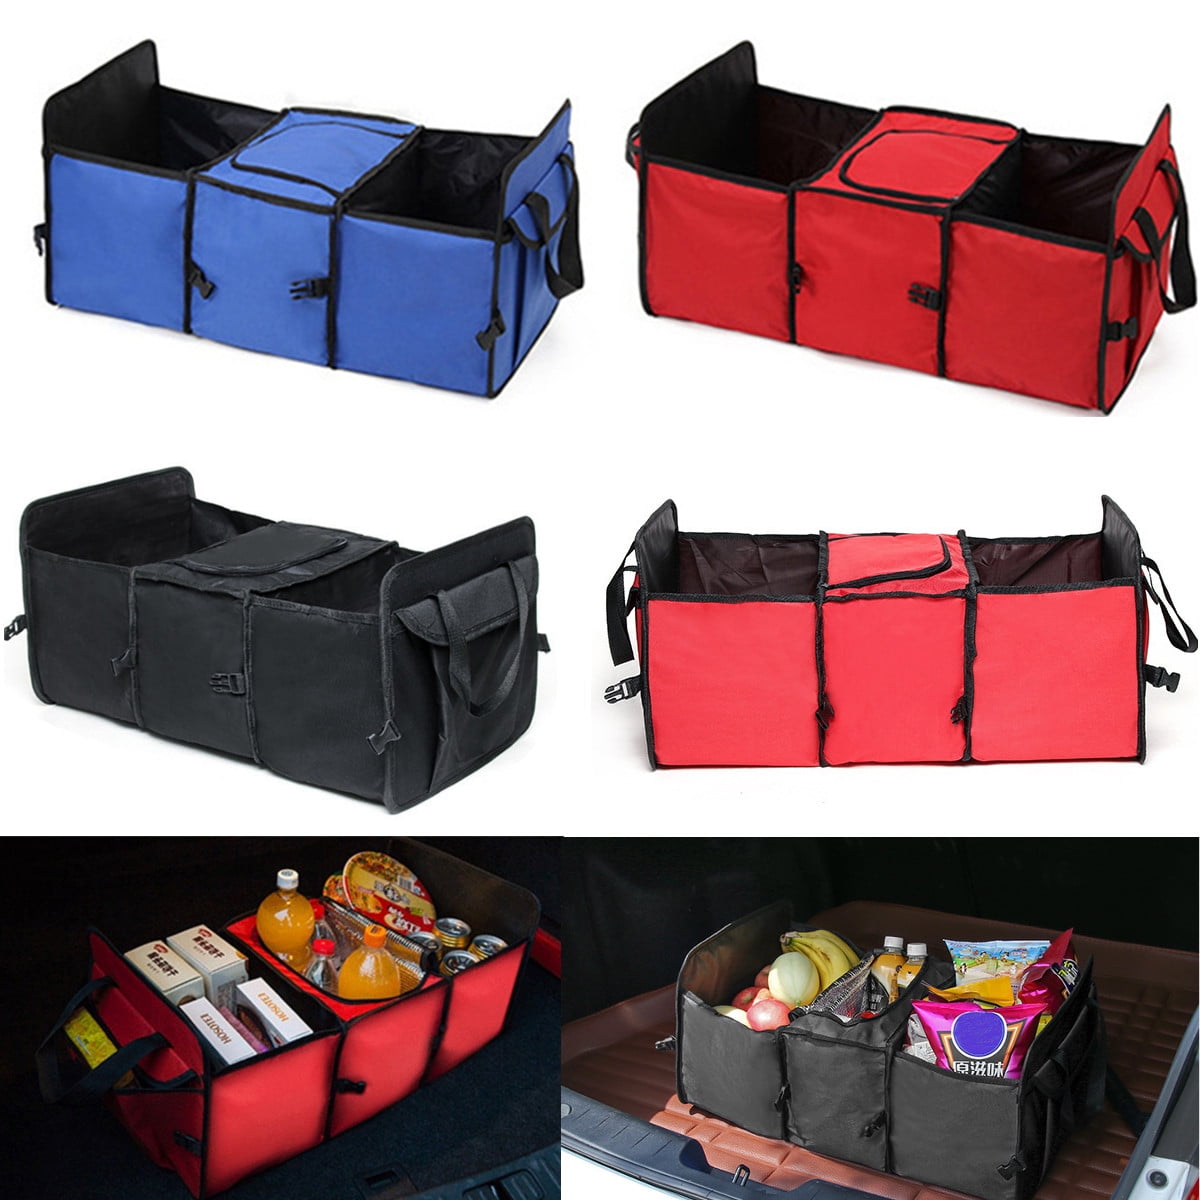 Extra Large Collapsible Trunk Organizer with Cooler Bag,3 Compartments Storage Organizer with Cover 